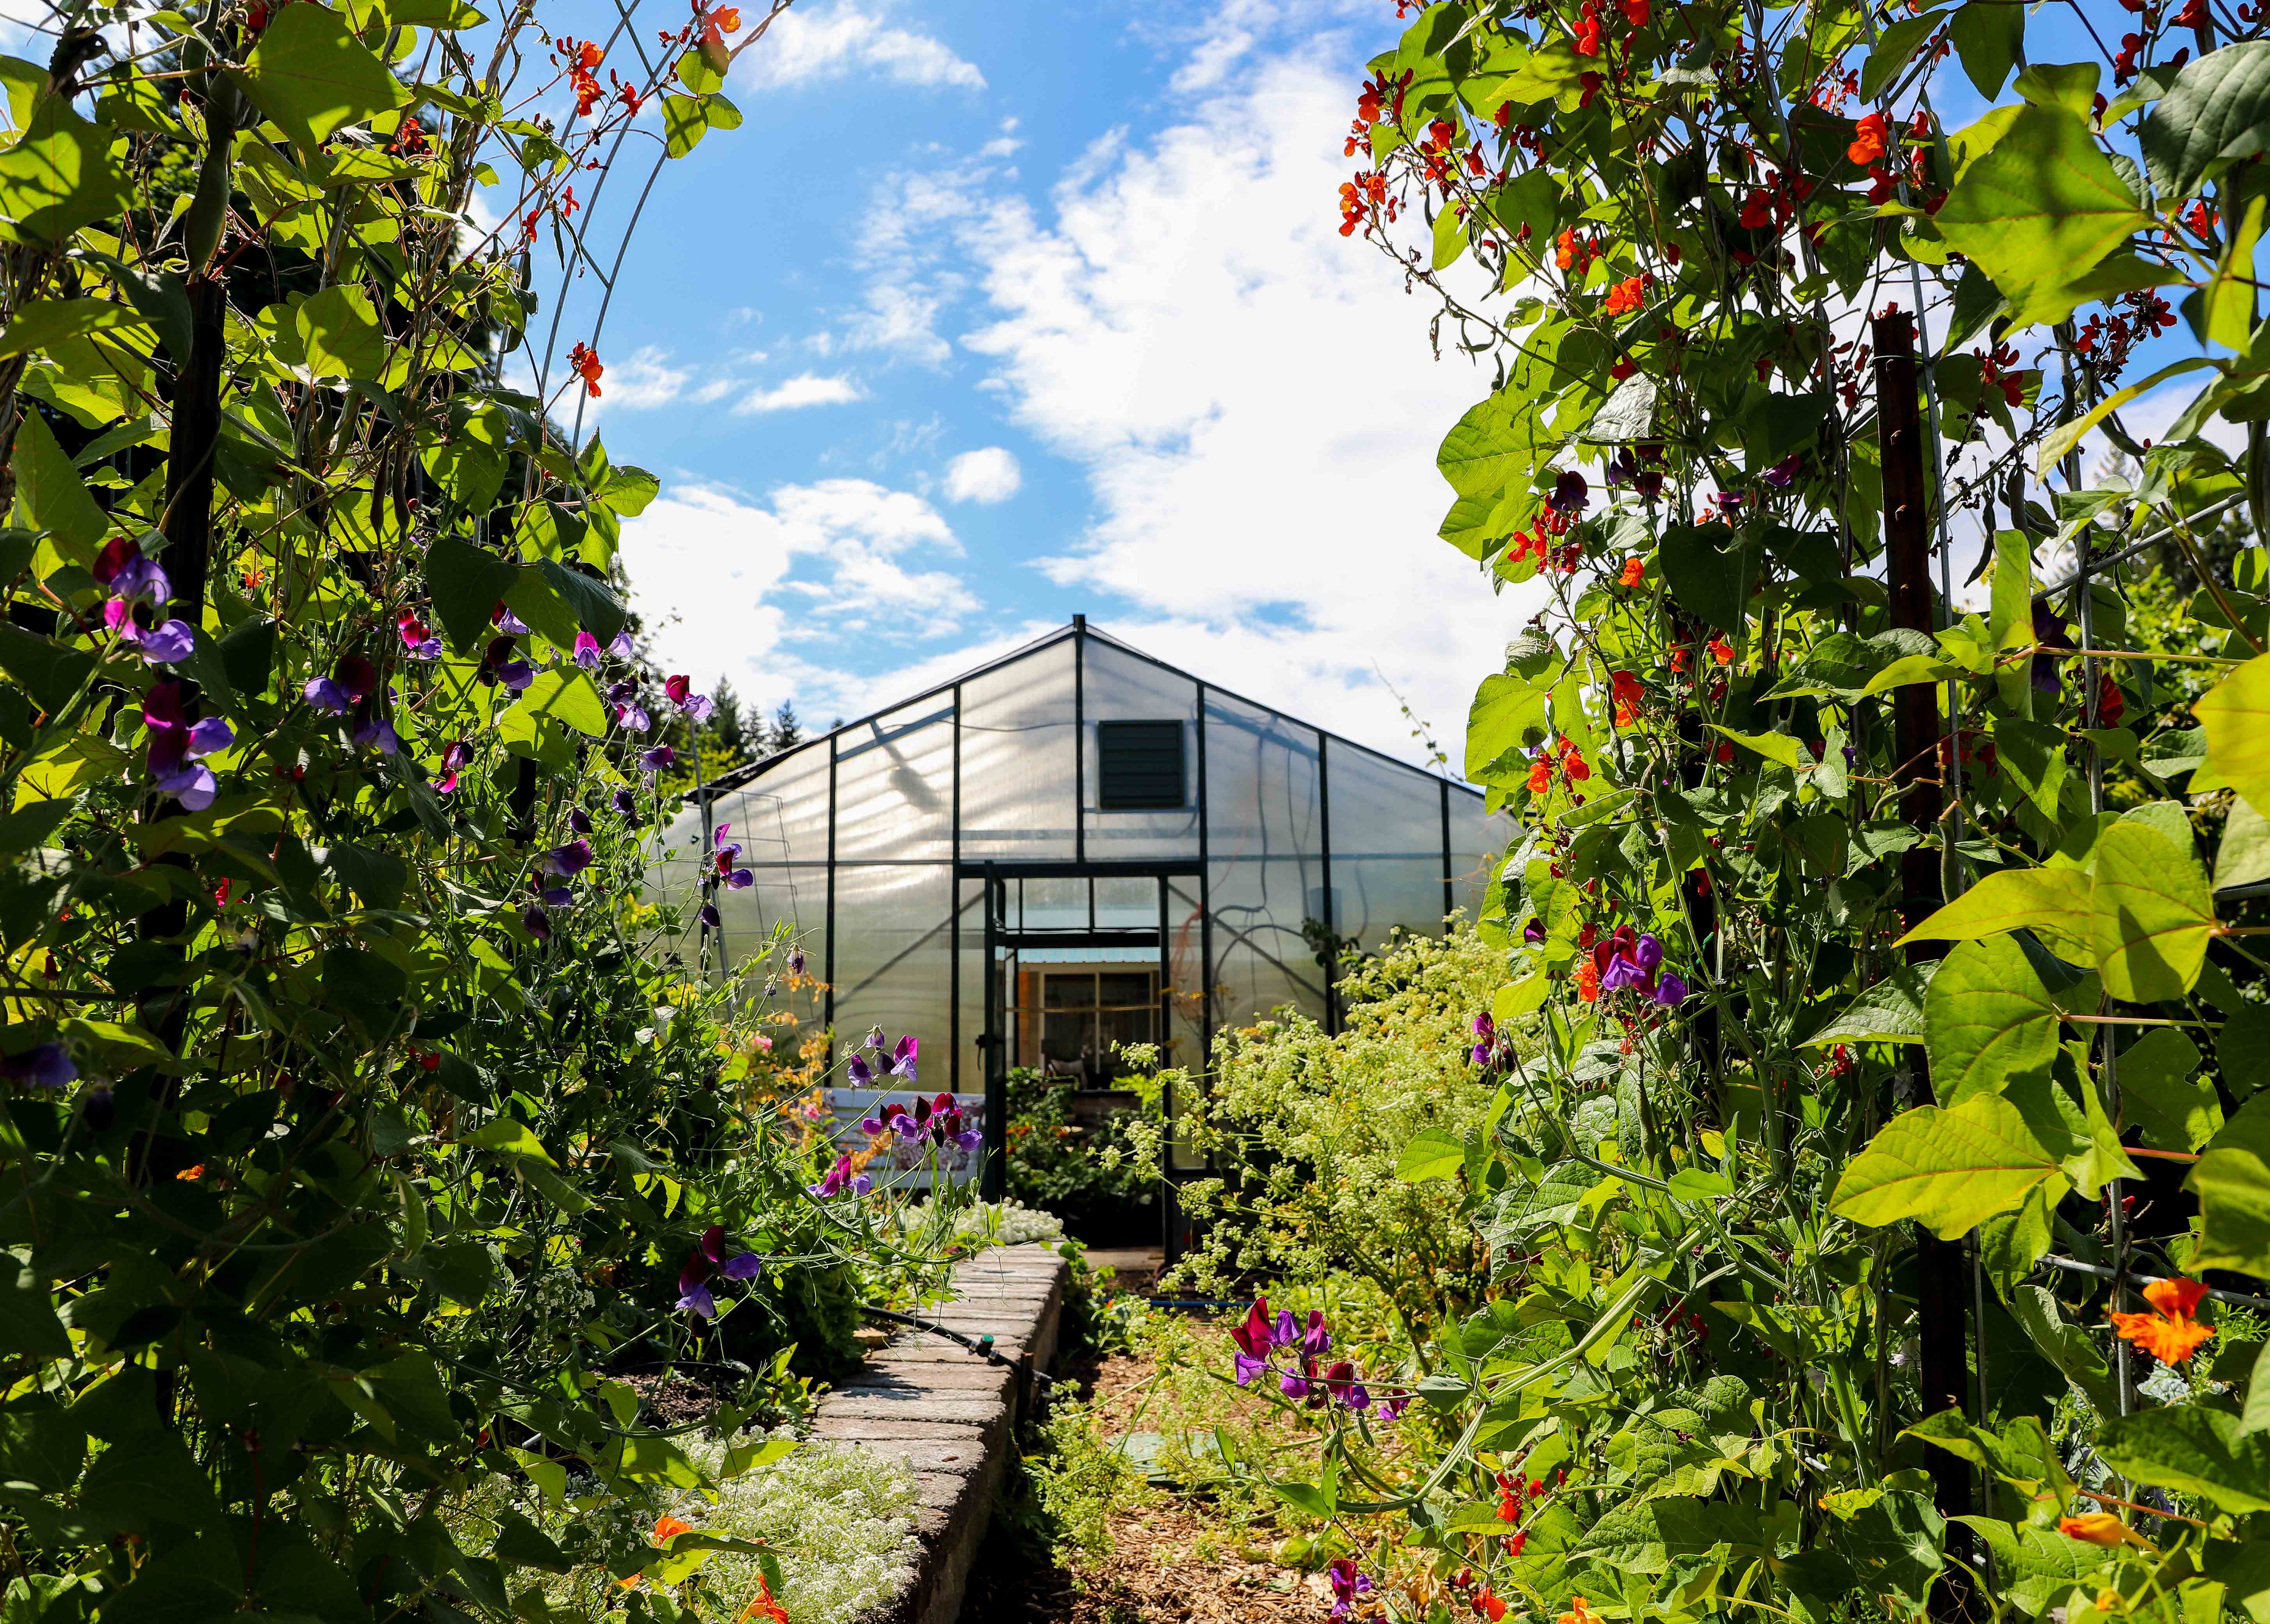 Pacific greenhouse surrounded by flowers